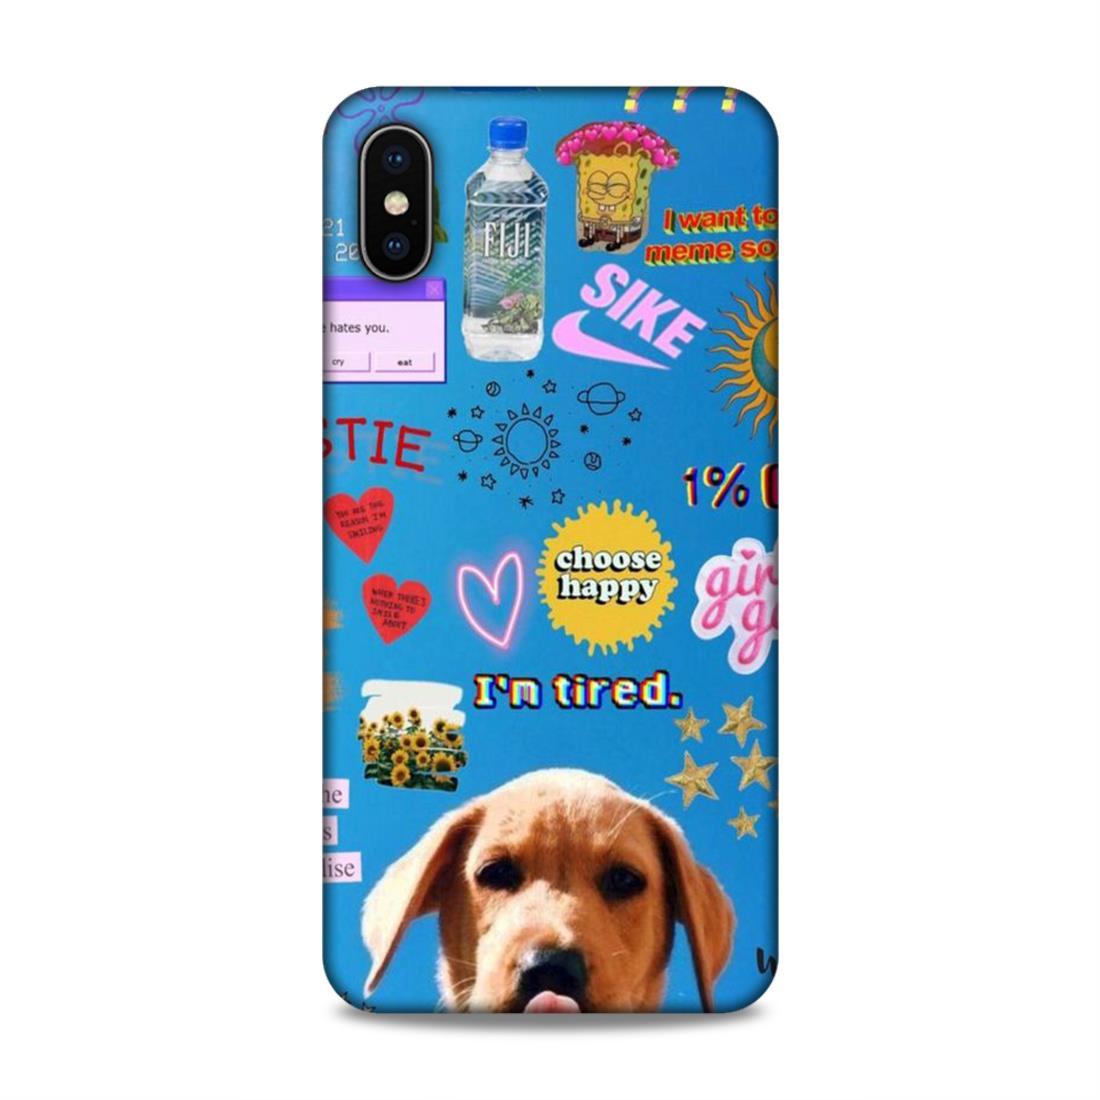 I am Tired iPhone XS Max Phone Cover Case